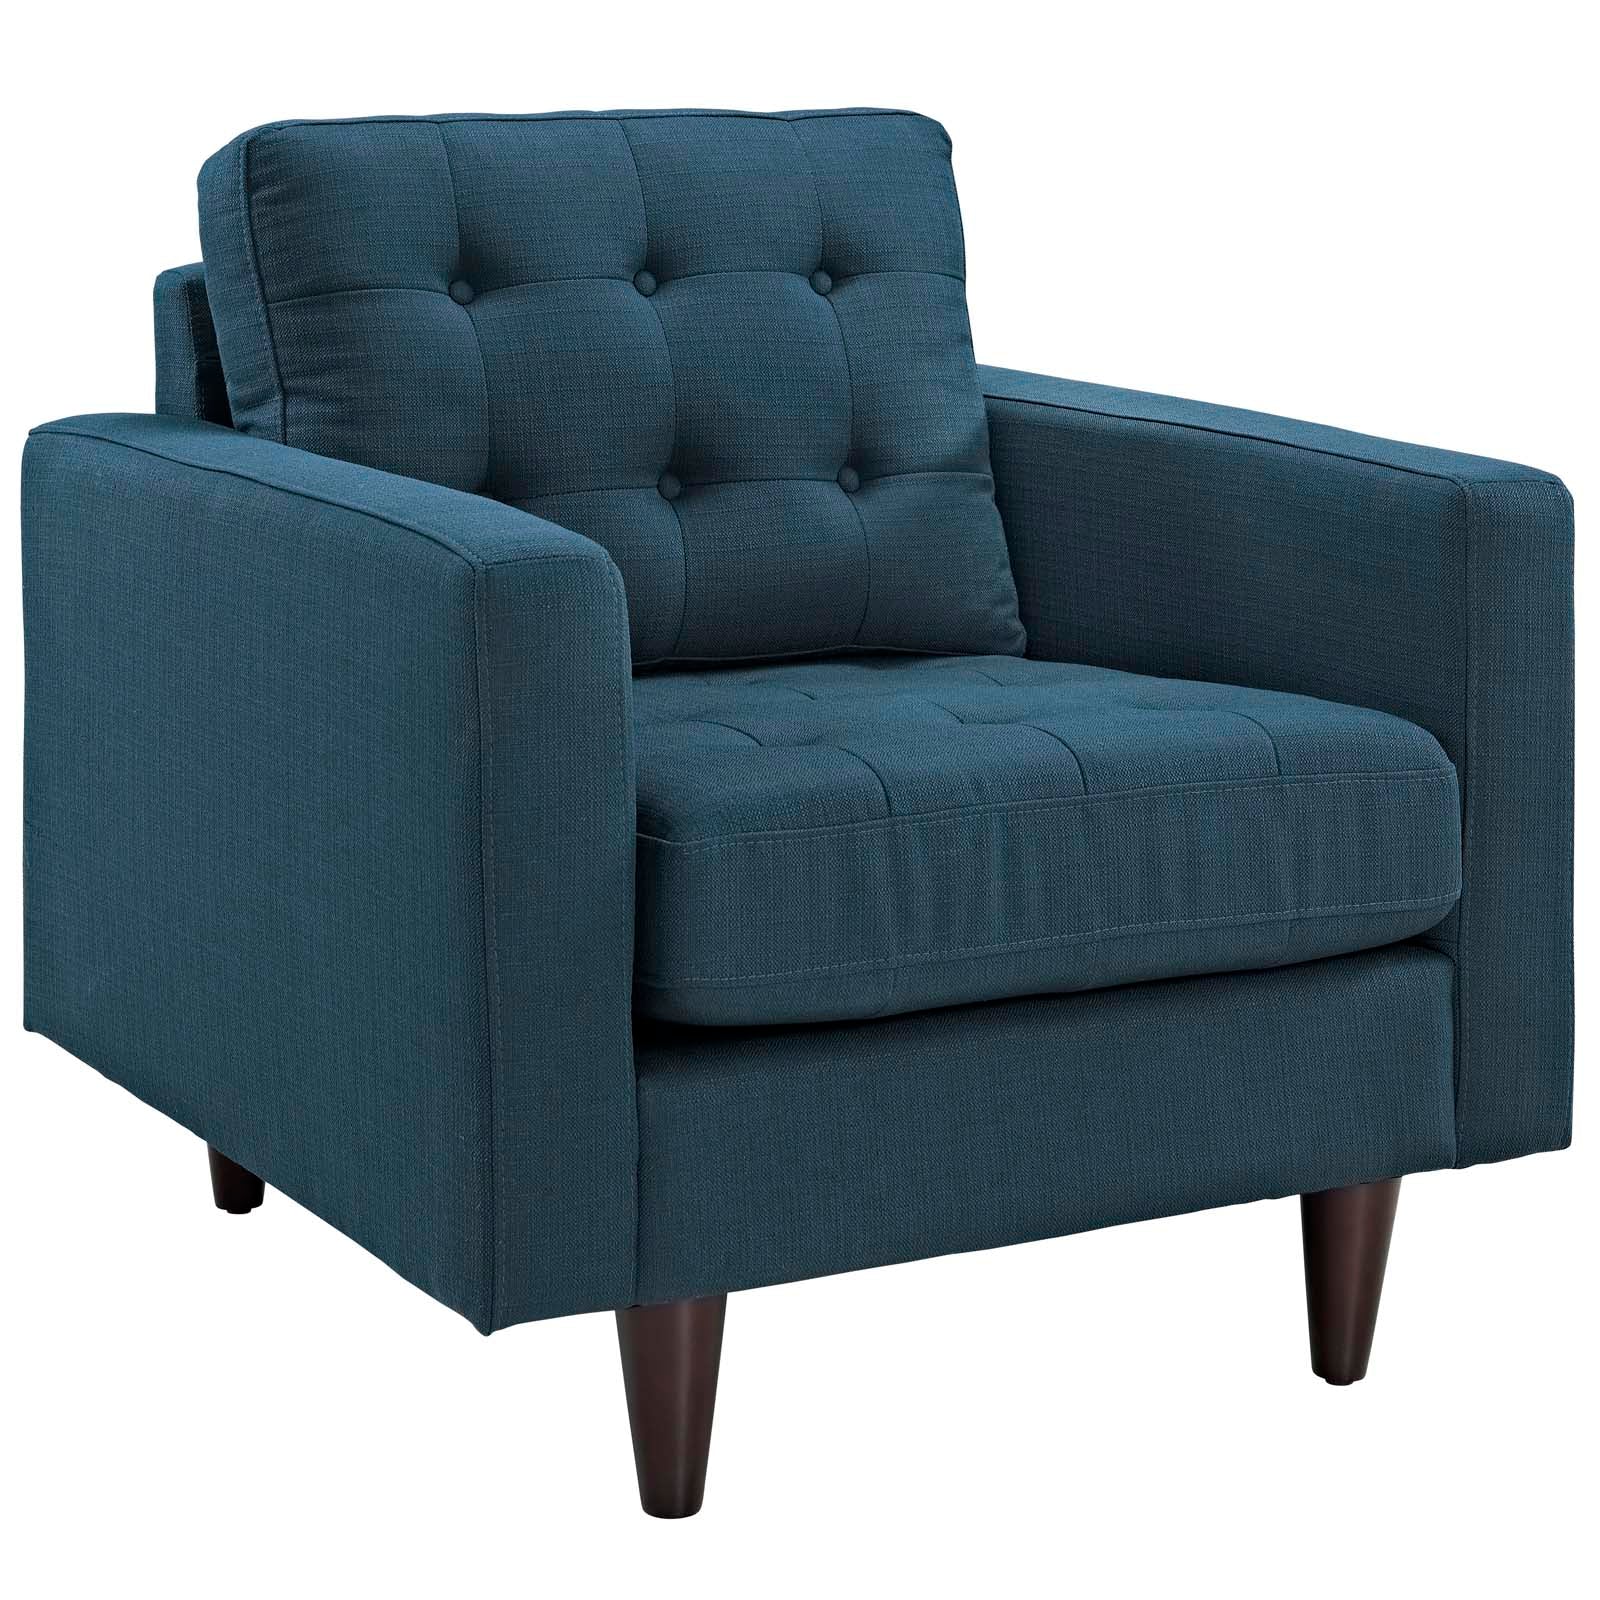 Modway Sofas & Couches - Empress-Sofa,-Loveseat-and-Armchair-Set-of-3-Azure